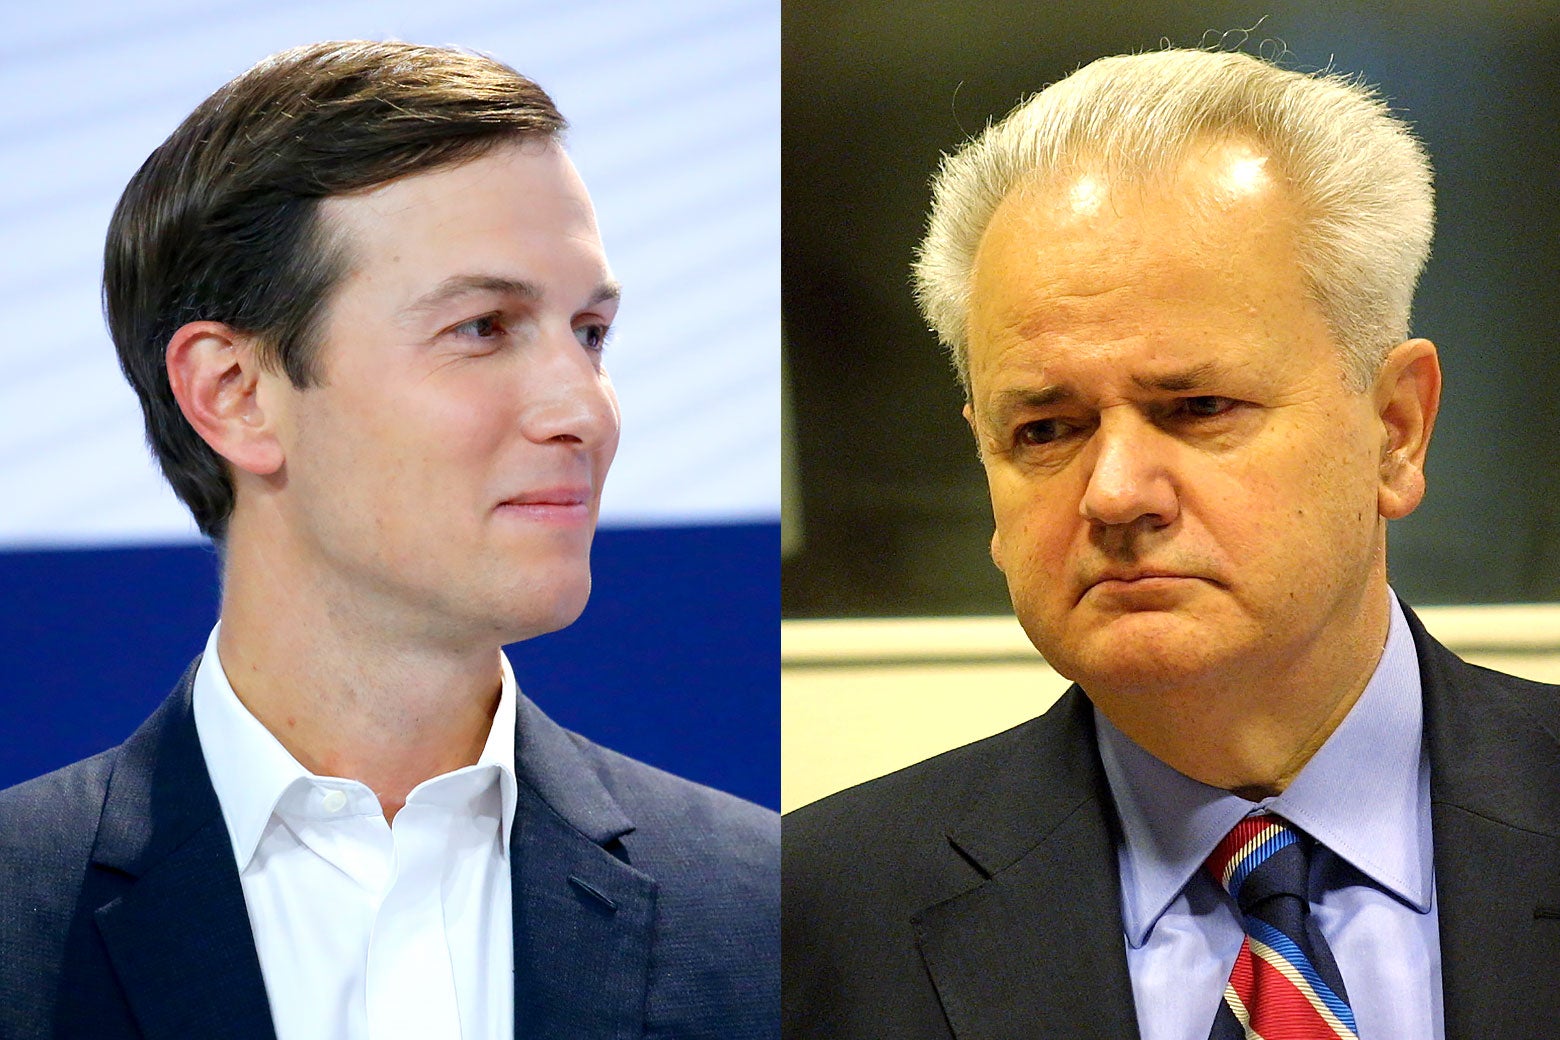 Left, Kushner looks to his left and smiling. Right, Milosevic frowns.